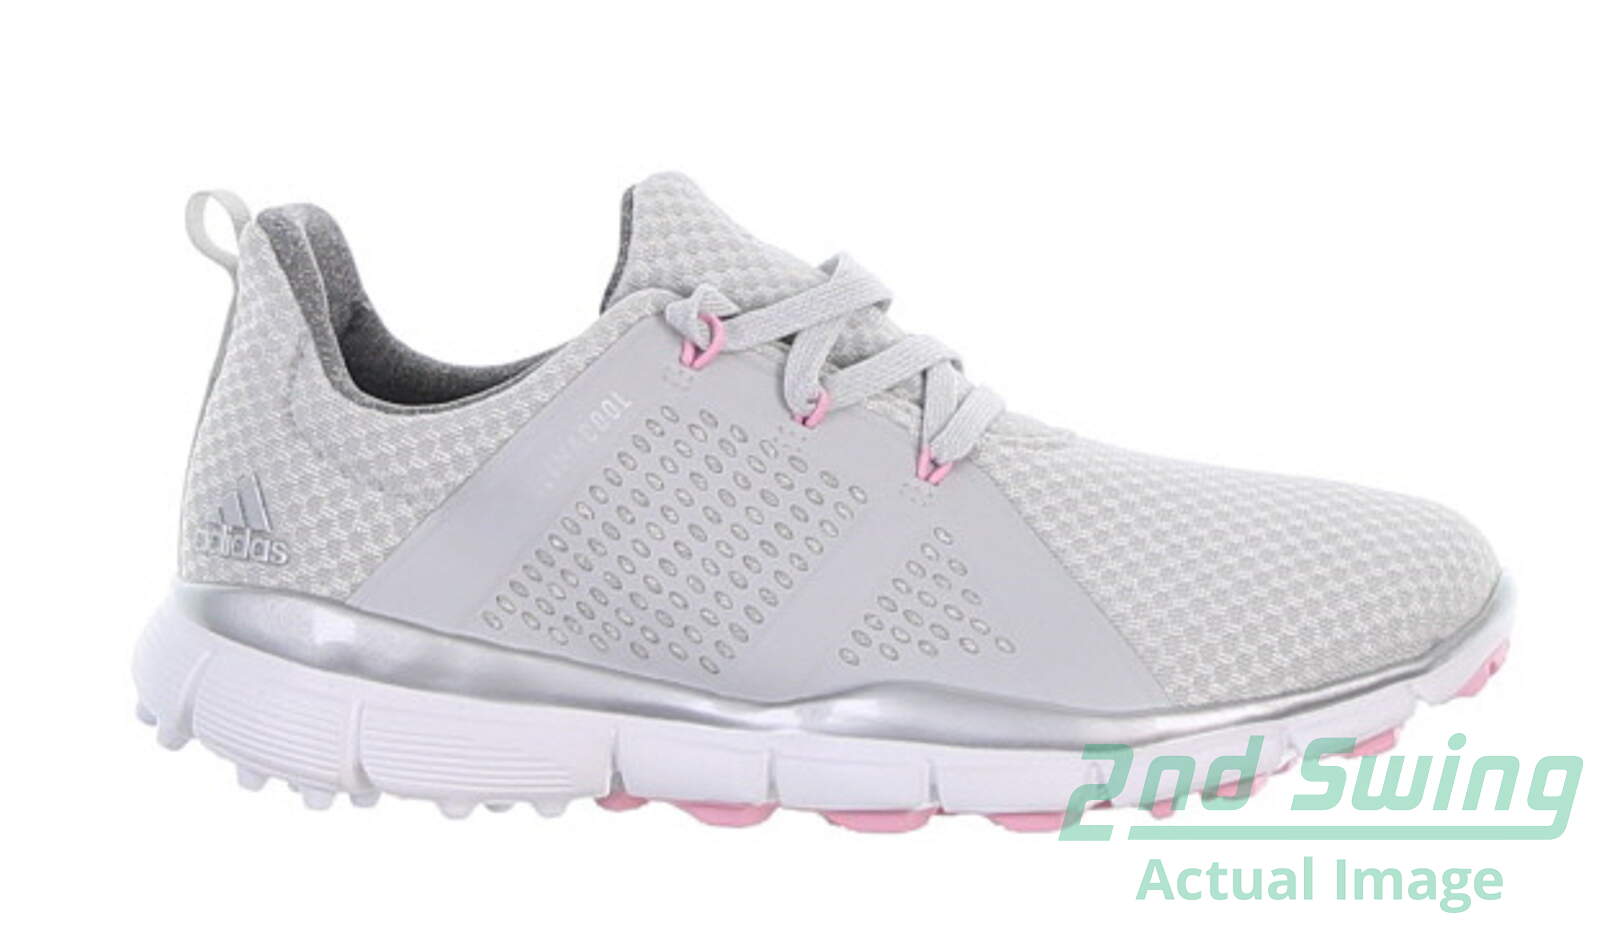 adidas climacool cage ladies golf shoes